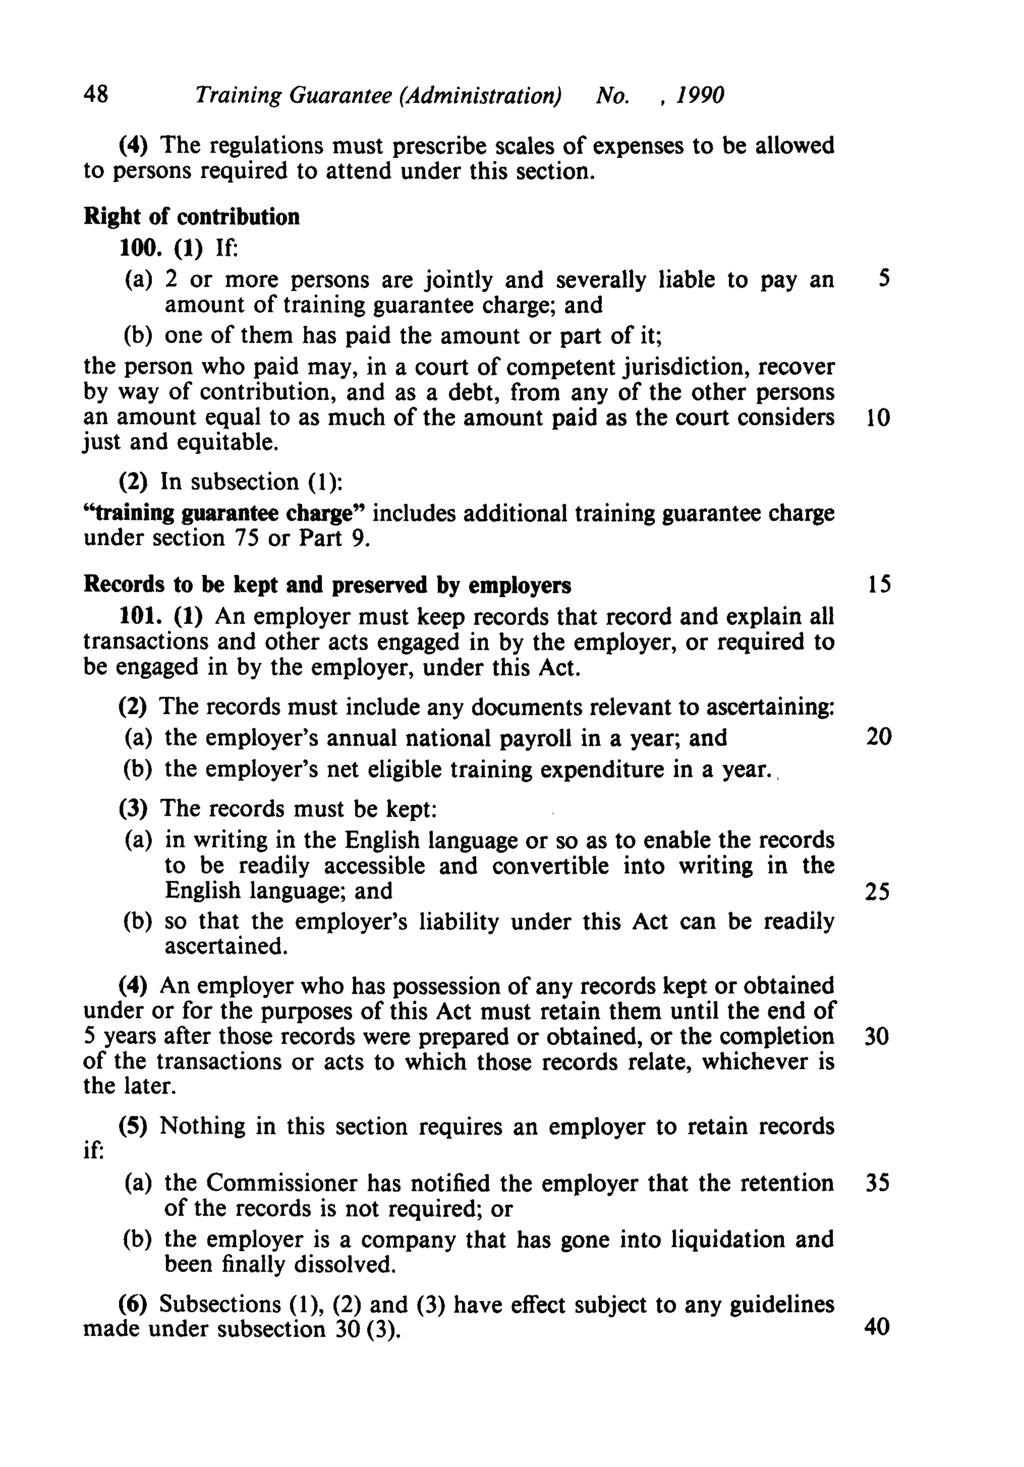 48 Training Guarantee (Administration) No., 1990 (4) The regulations must prescribe scales of expenses to be allowed to persons required to attend under this section. Right of contribution 100.